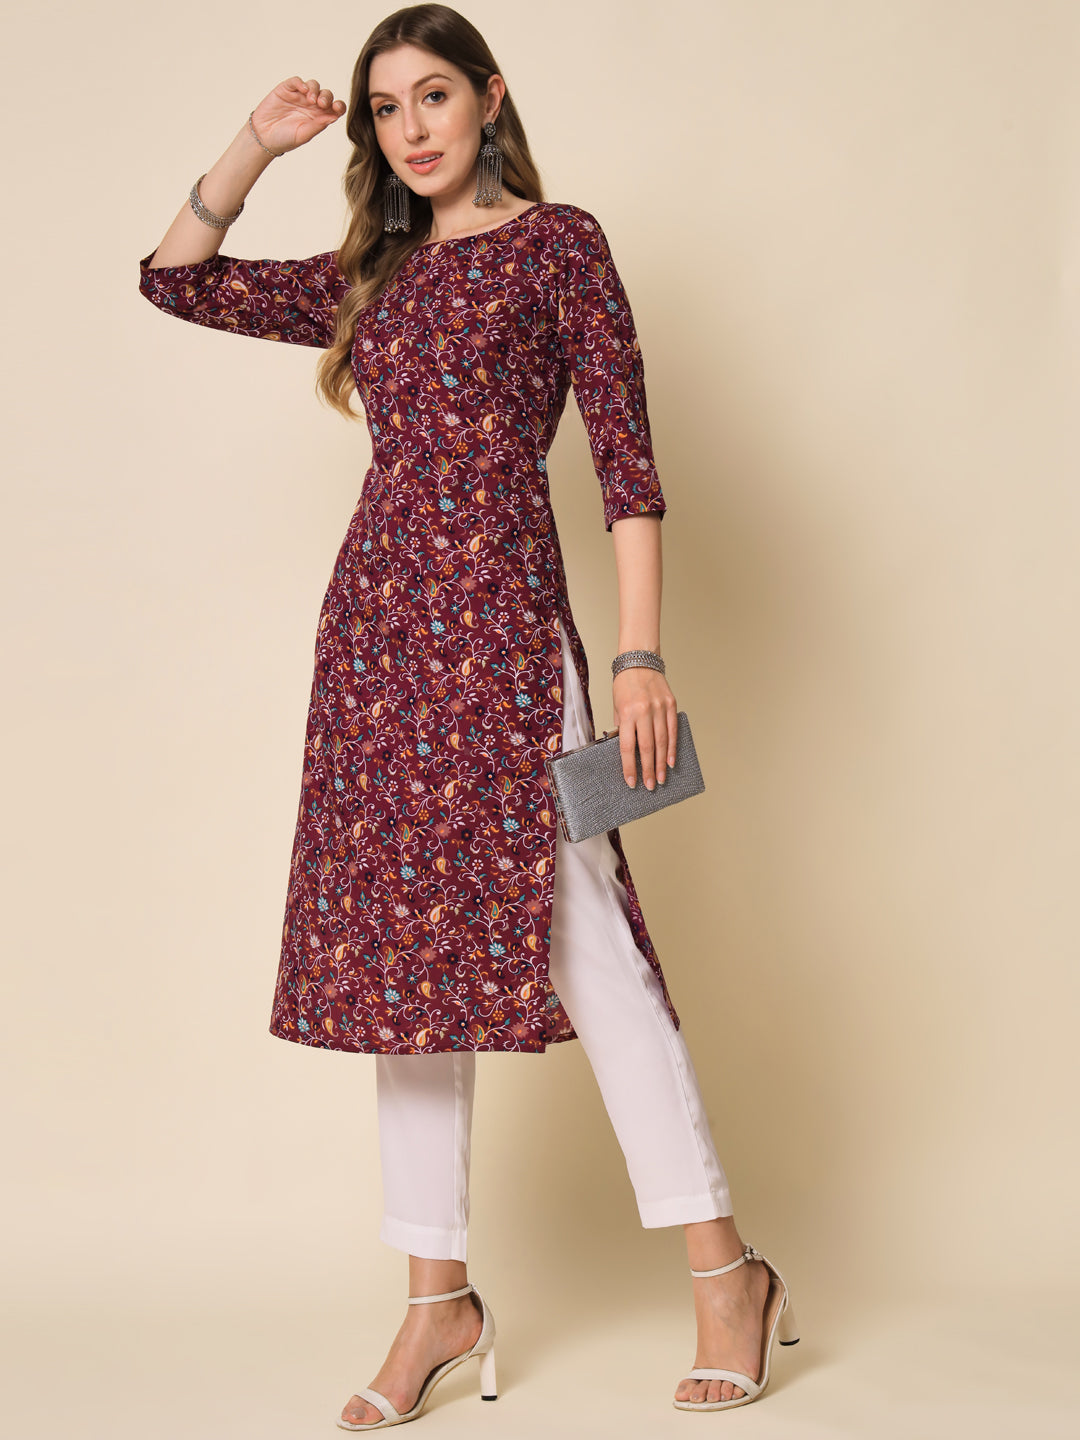 A GLORIOUS HISTORY OF INDIAN KURTIS – The Loom Blog